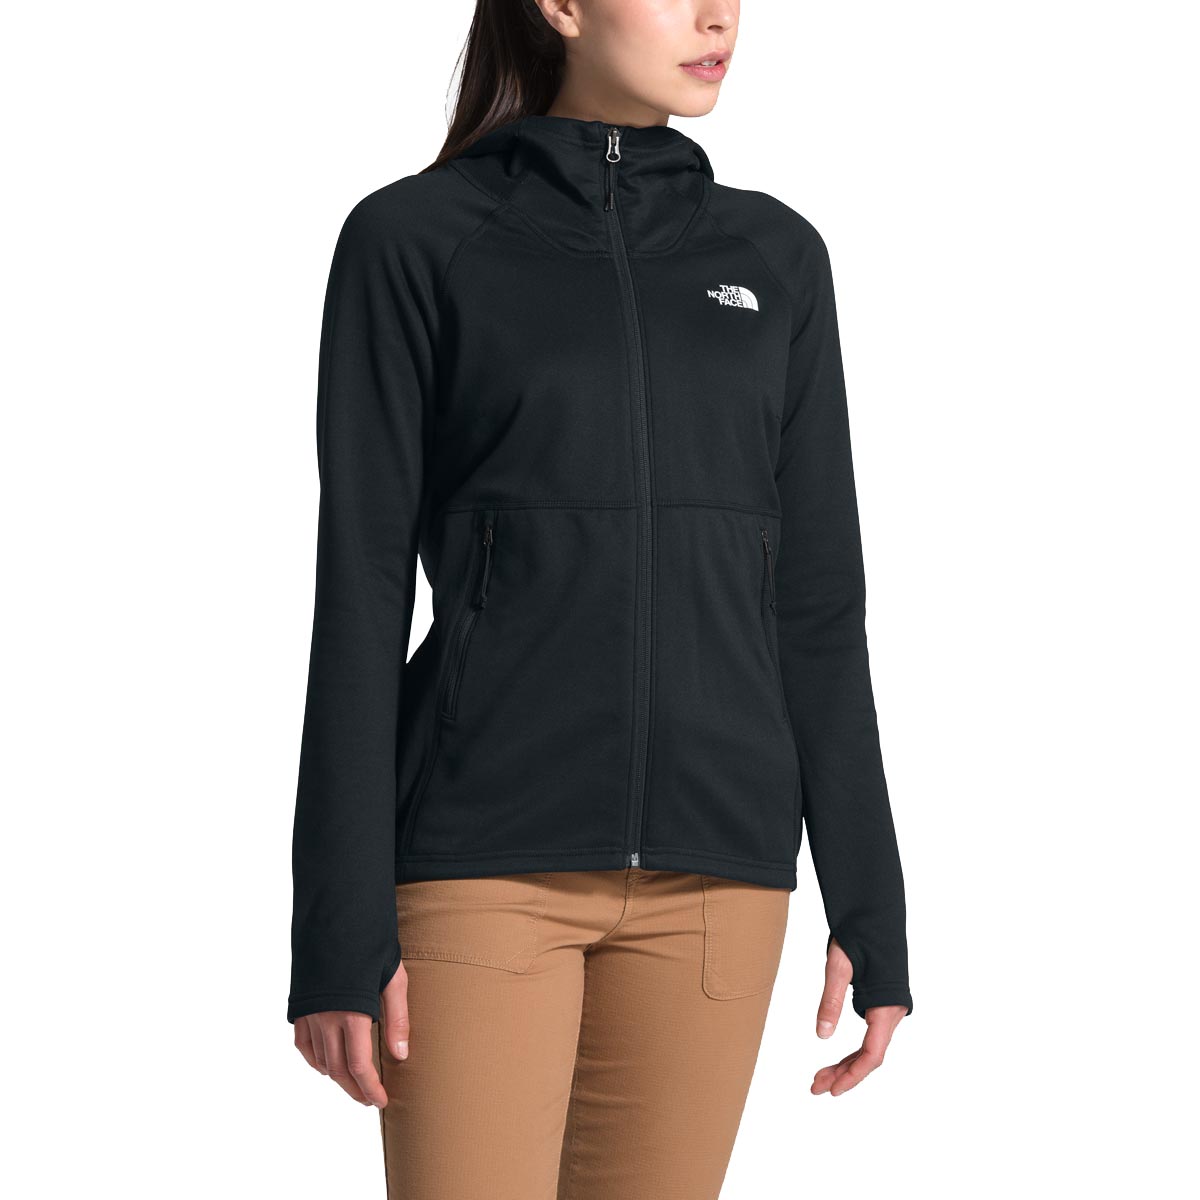 the north face canyonlands hoodie